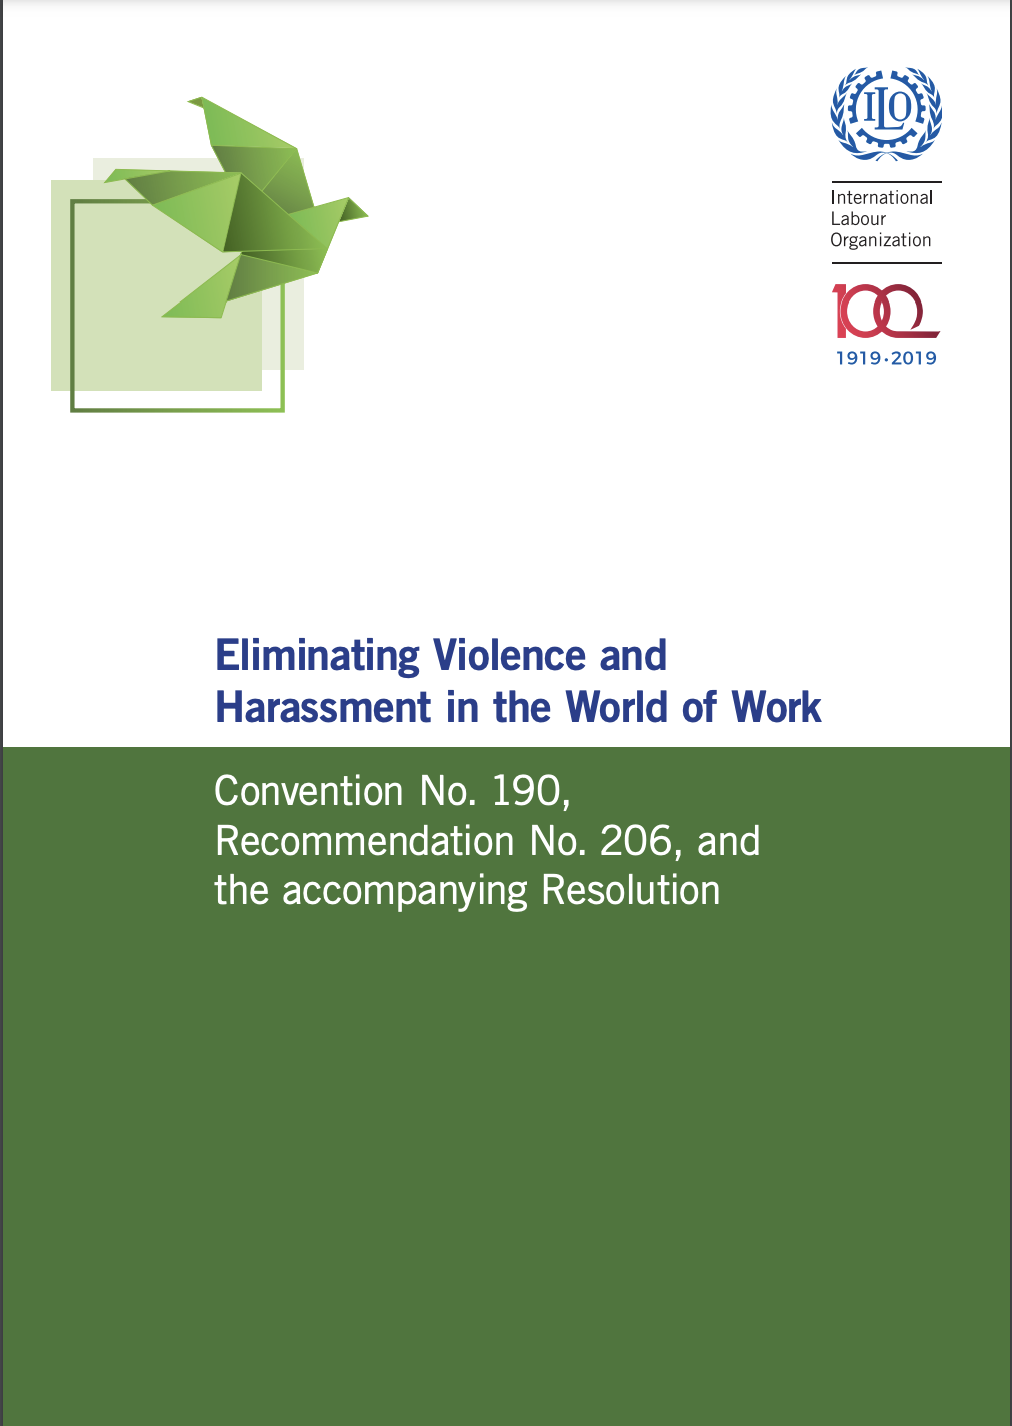 Eliminating Violence and Harassment in the World of Work.png